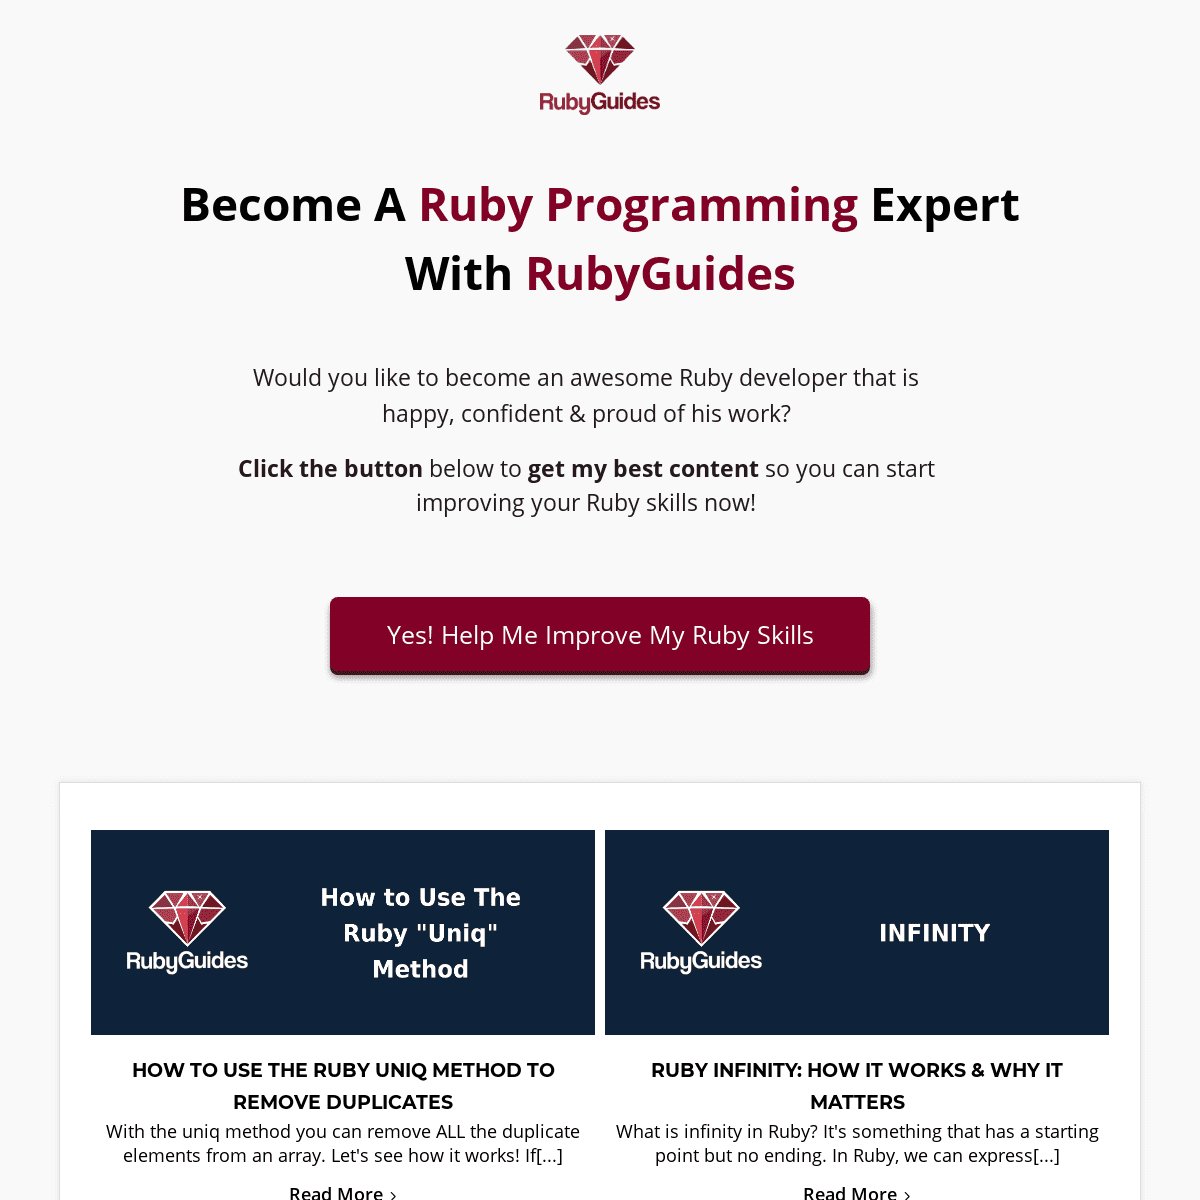 RubyGuides - Learn Ruby With Awesome Tutorials